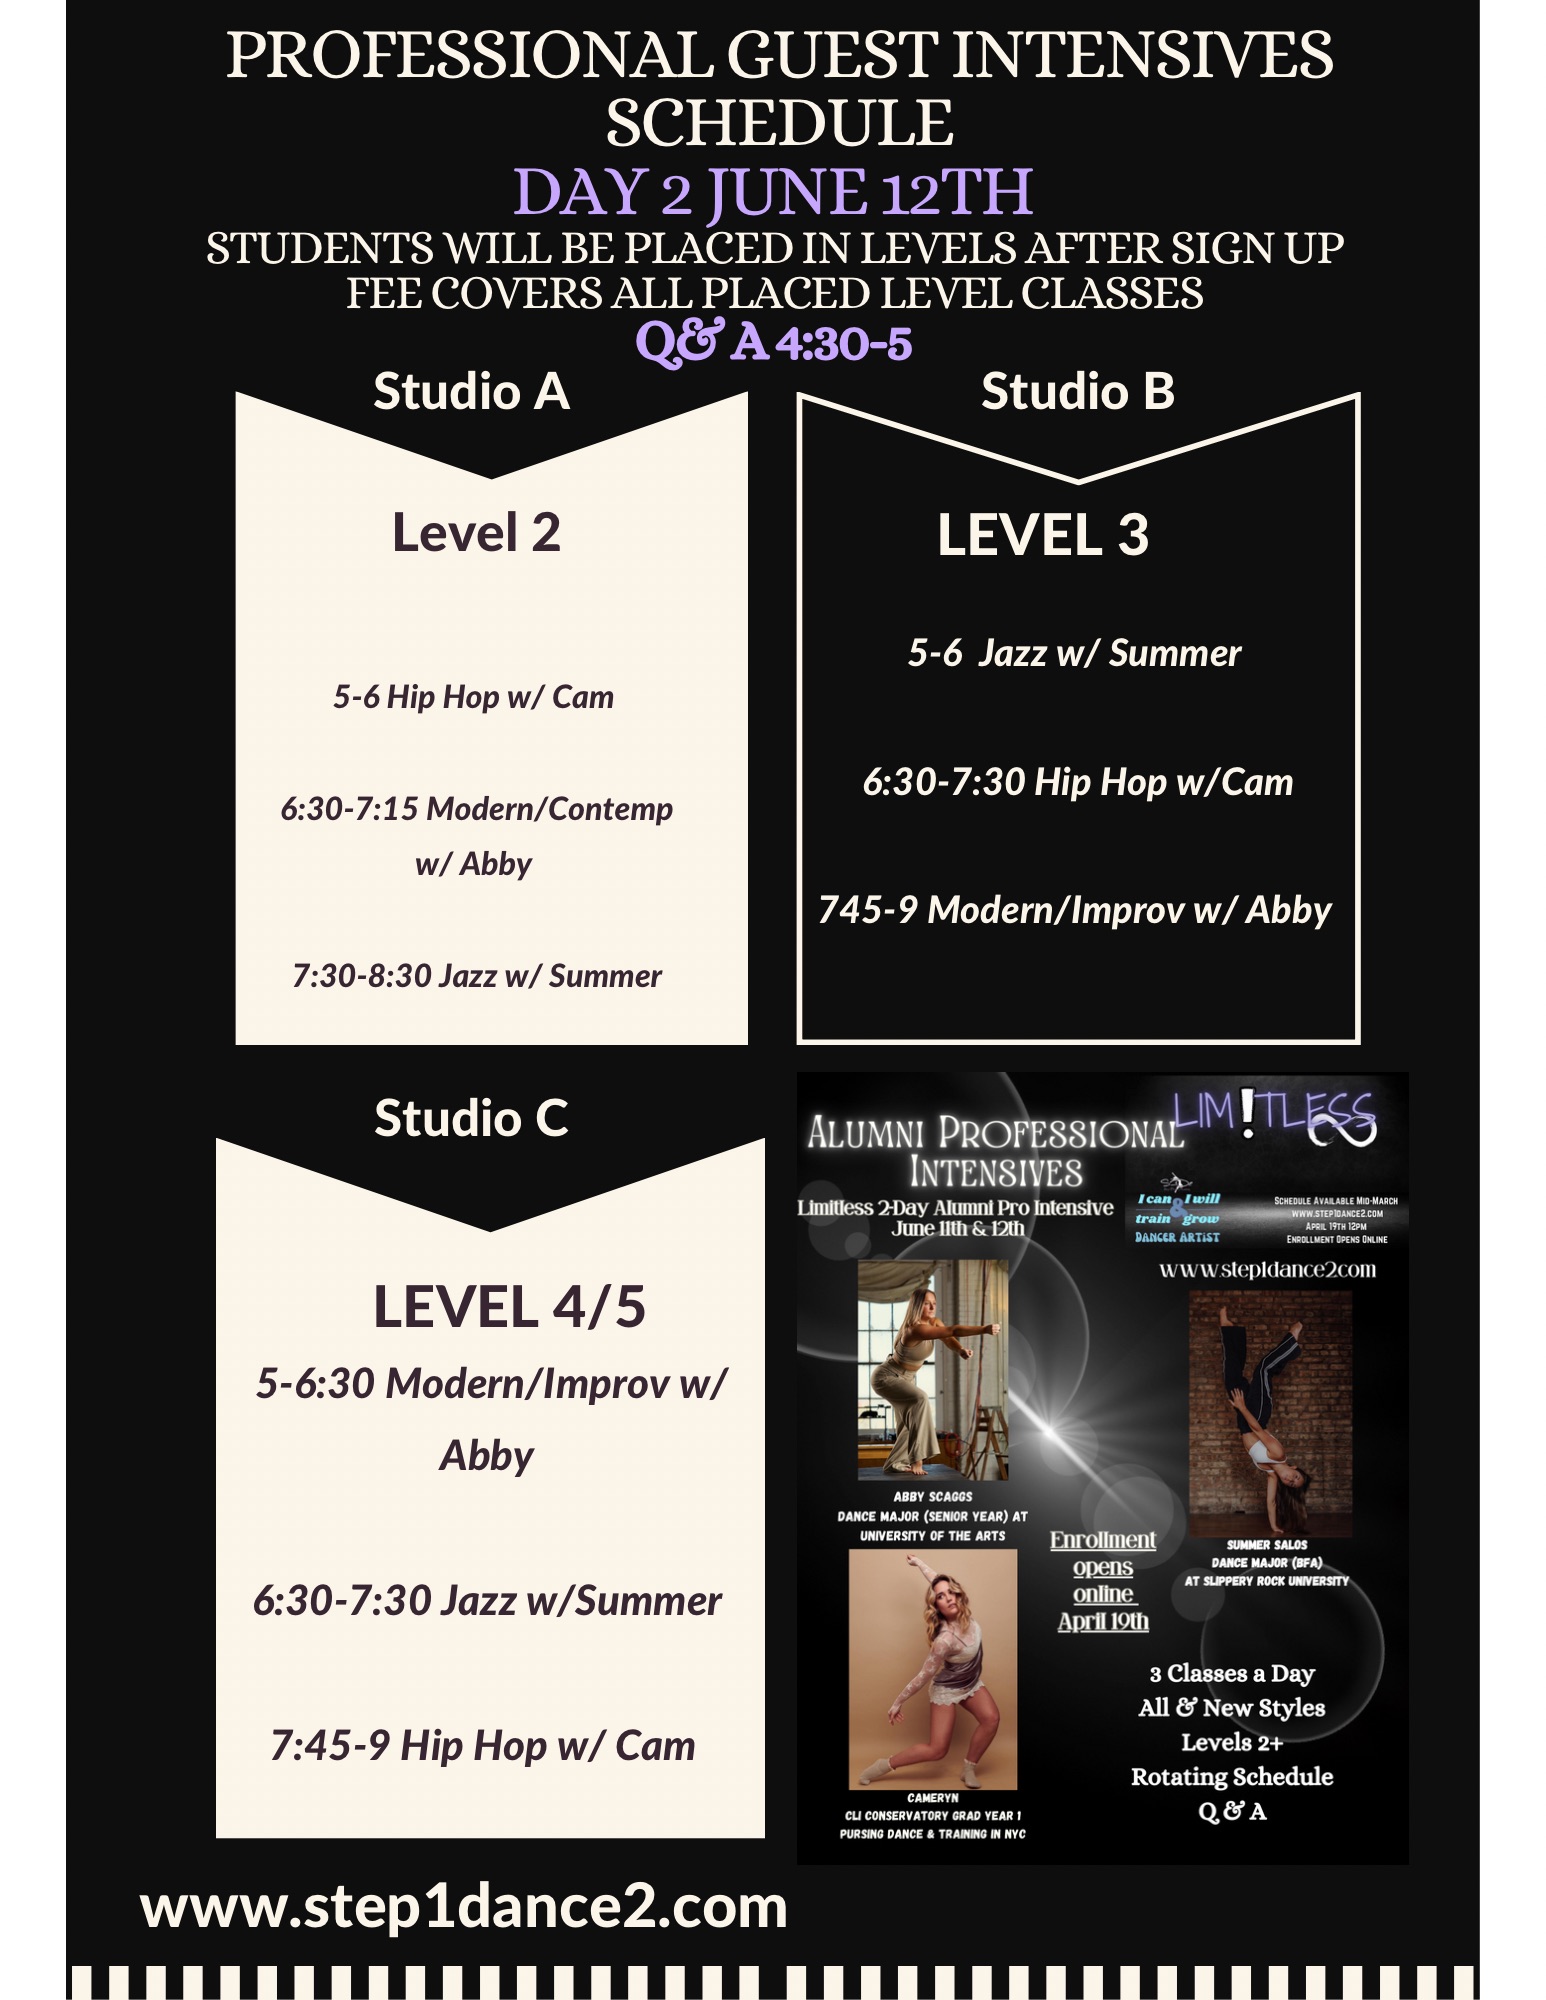 Limitless Professional Guest Intensives Schedule - Day 2